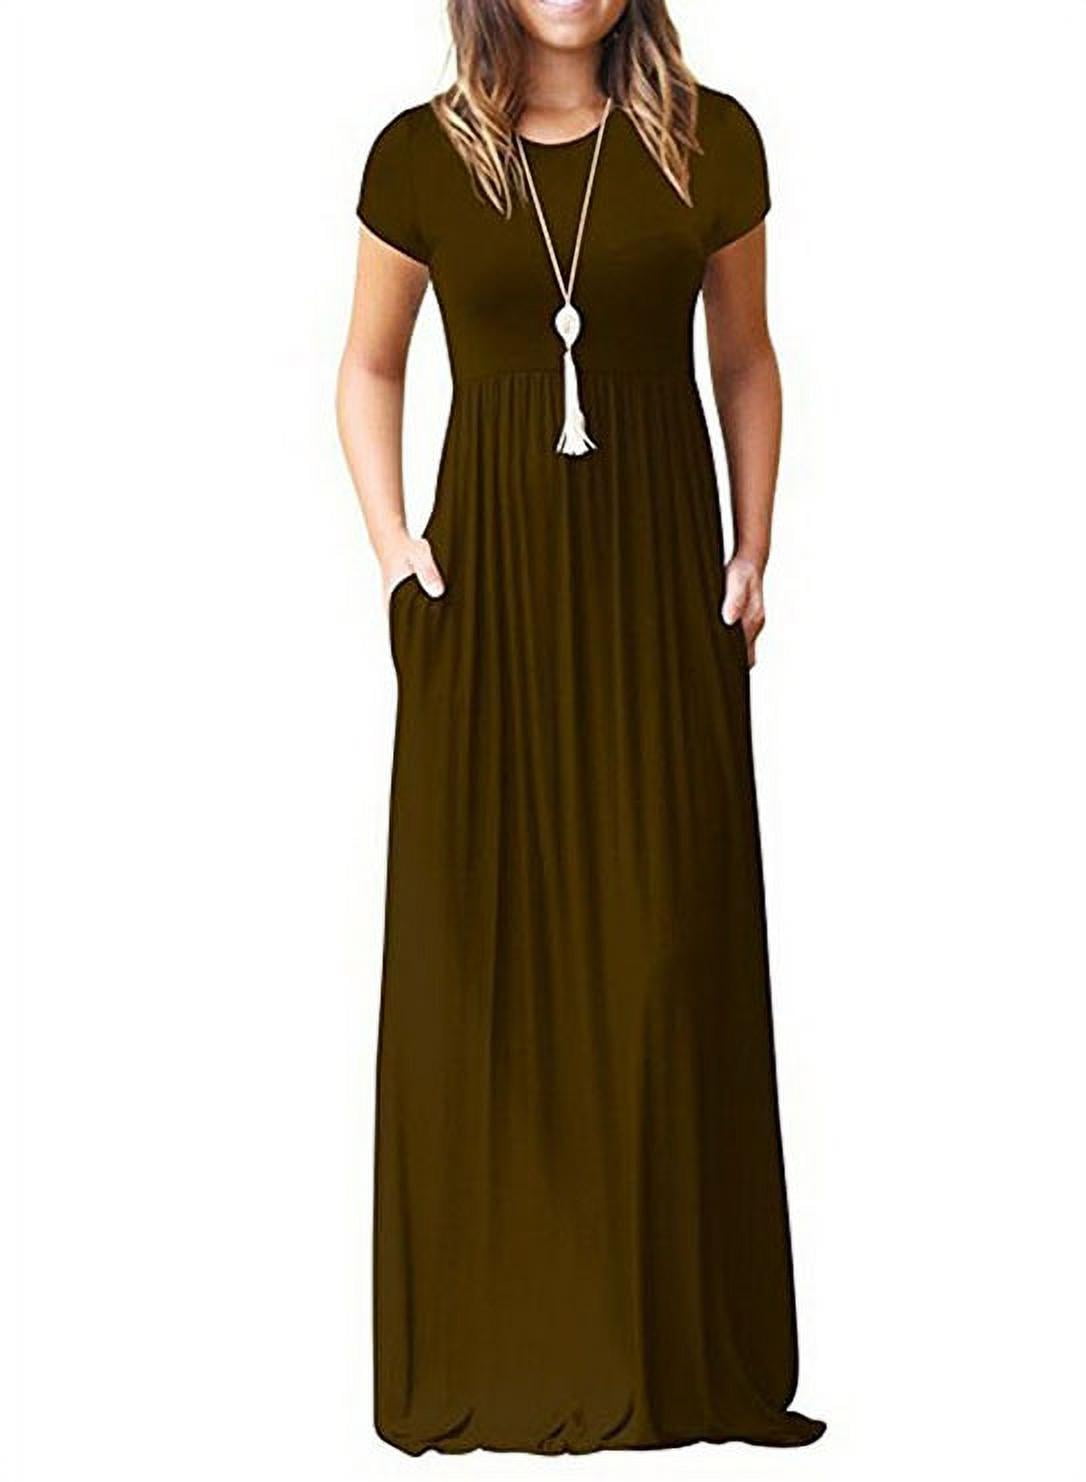 Rrive Womens Plus Size with Pockets Crew Neck Solid Color Sleeveless Maxi Dress 